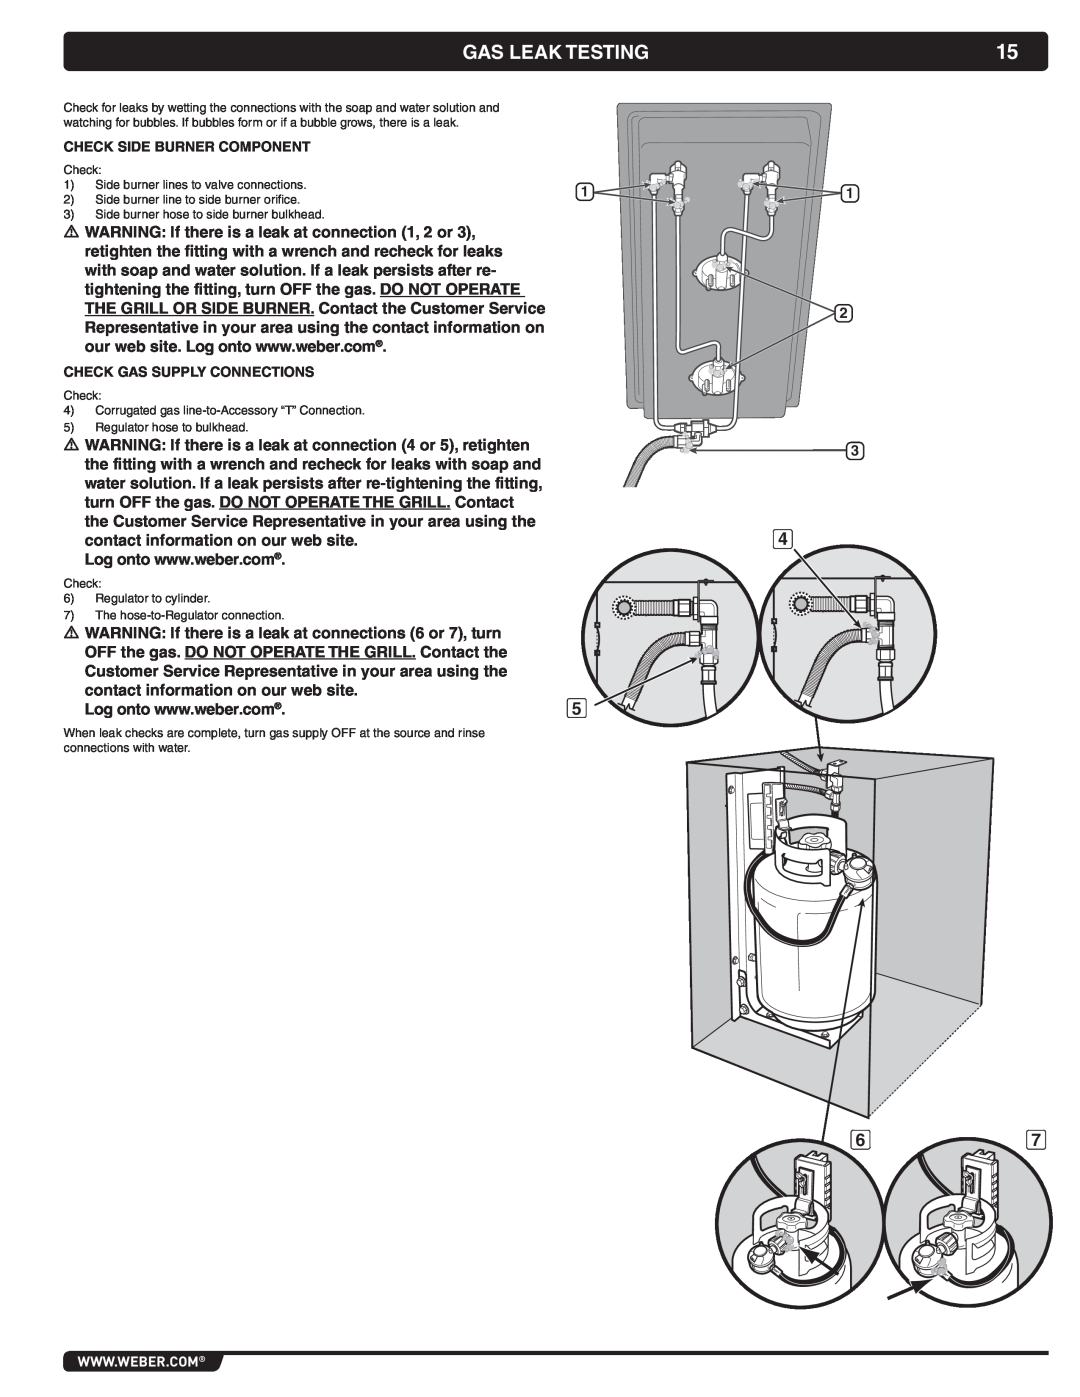 Weber 56069 manual Gas Leak Testing, Check Side Burner Component, Check Gas Supply Connections 